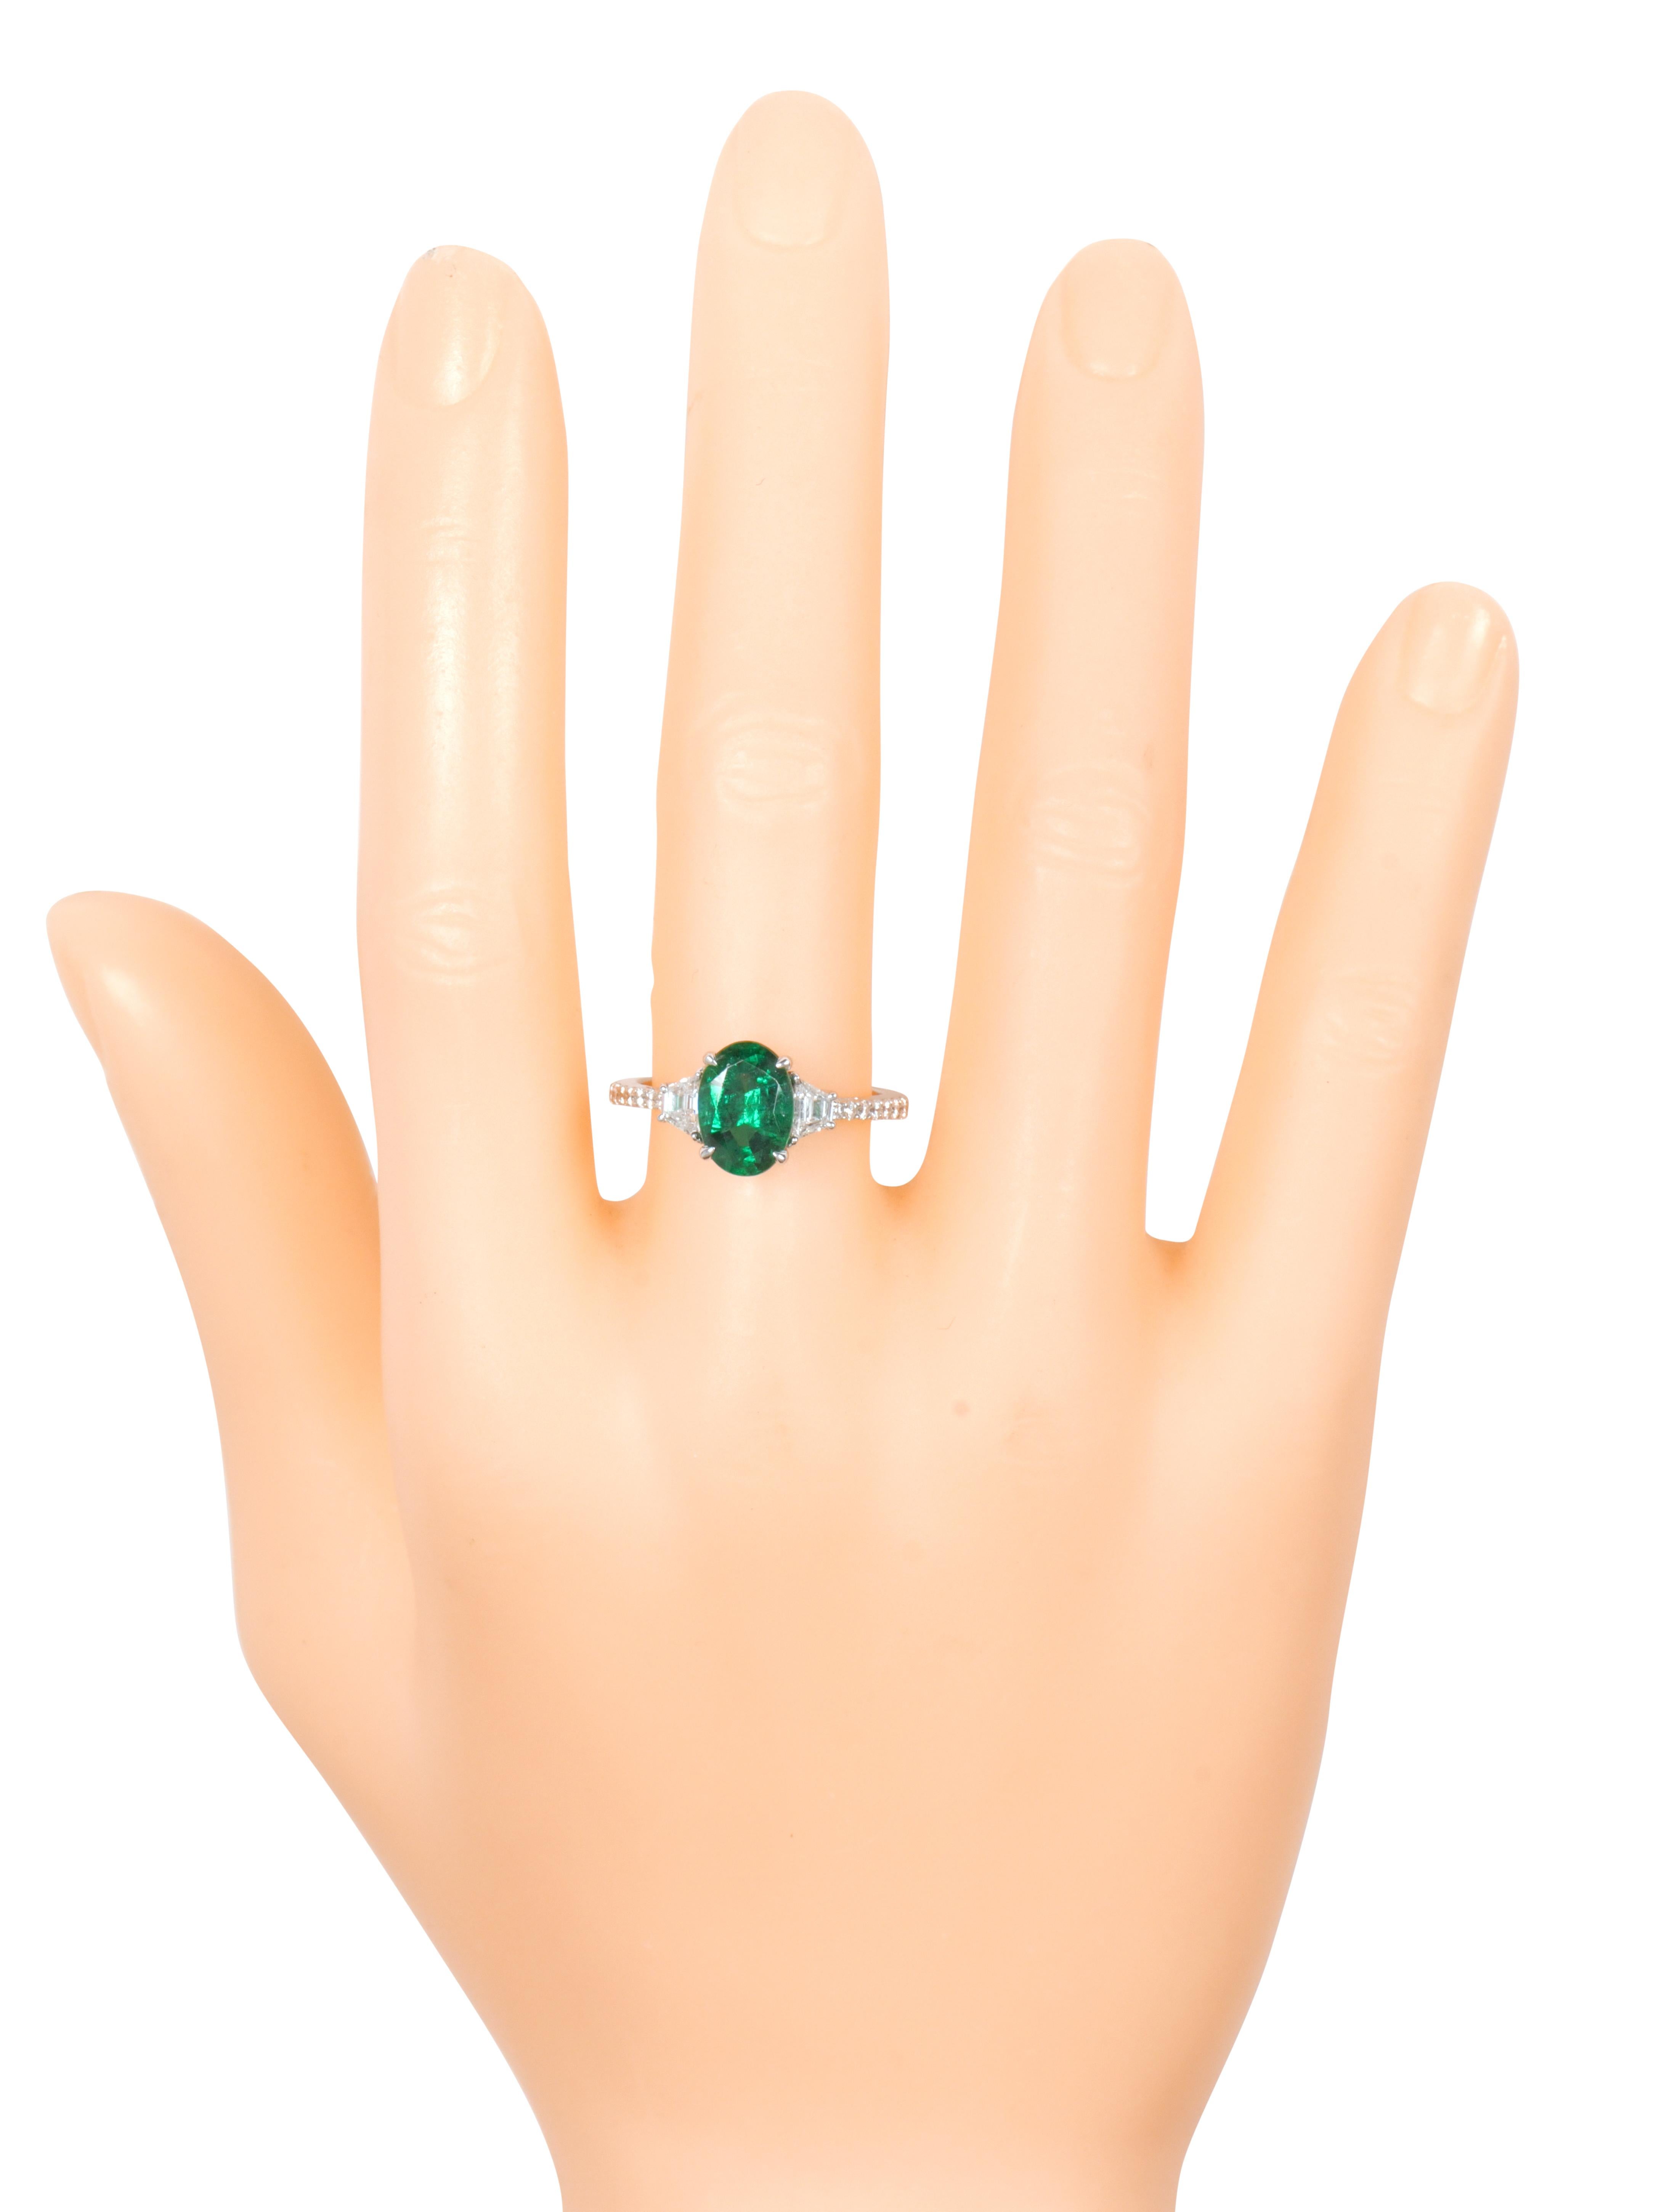 18 Karat White Gold 2.20 Carat Natural Emerald and Diamond Ring

This glorious trinity shamrock green emerald and diamond ring is marvelous. The three-stone trinity ring tells a story by not only representing the said “past, present, and future” but